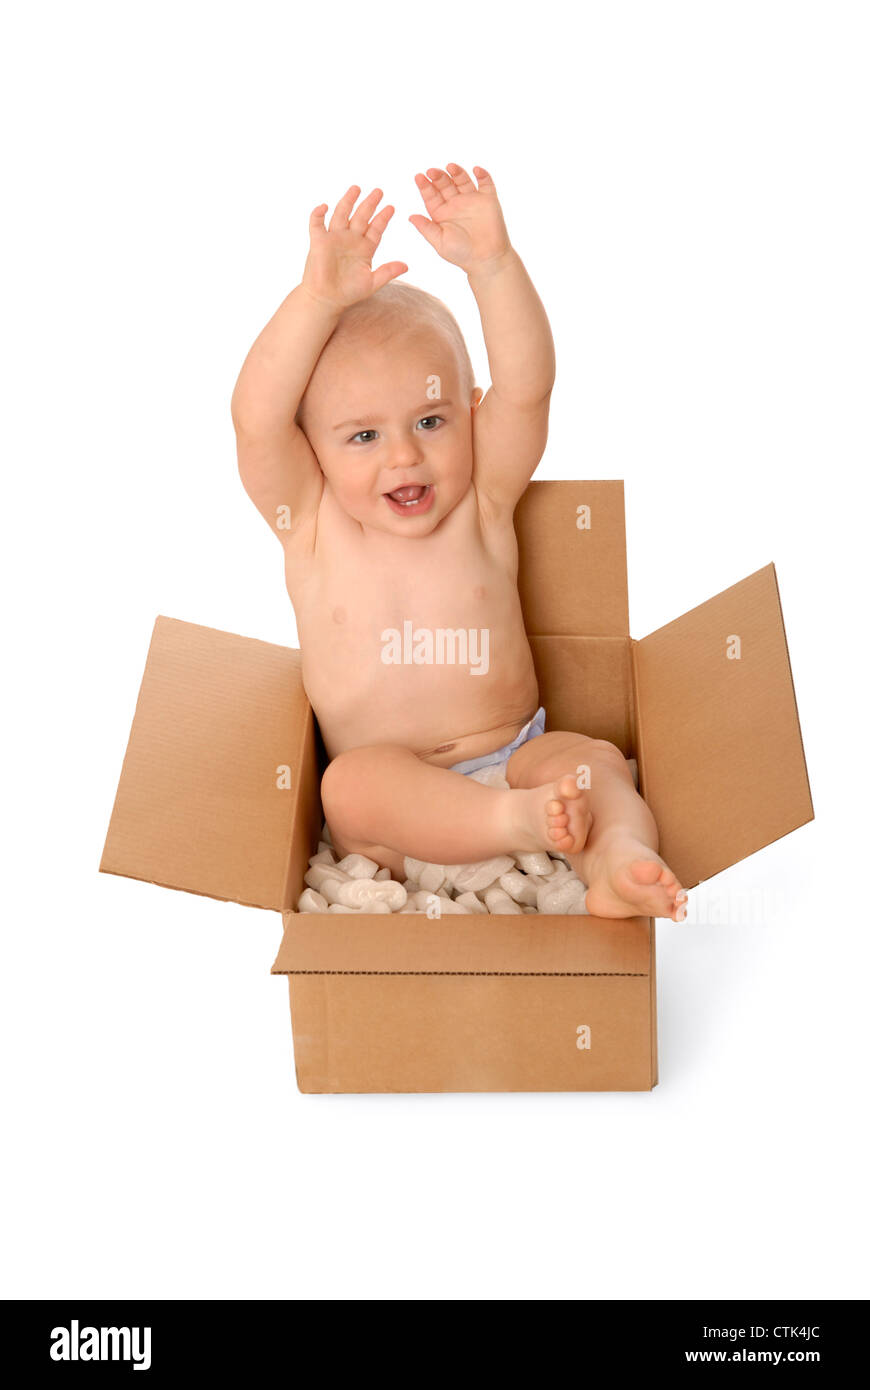 Happy one year old baby boy sitting in a cardboard box, with foam packing  peanuts Stock Photo - Alamy